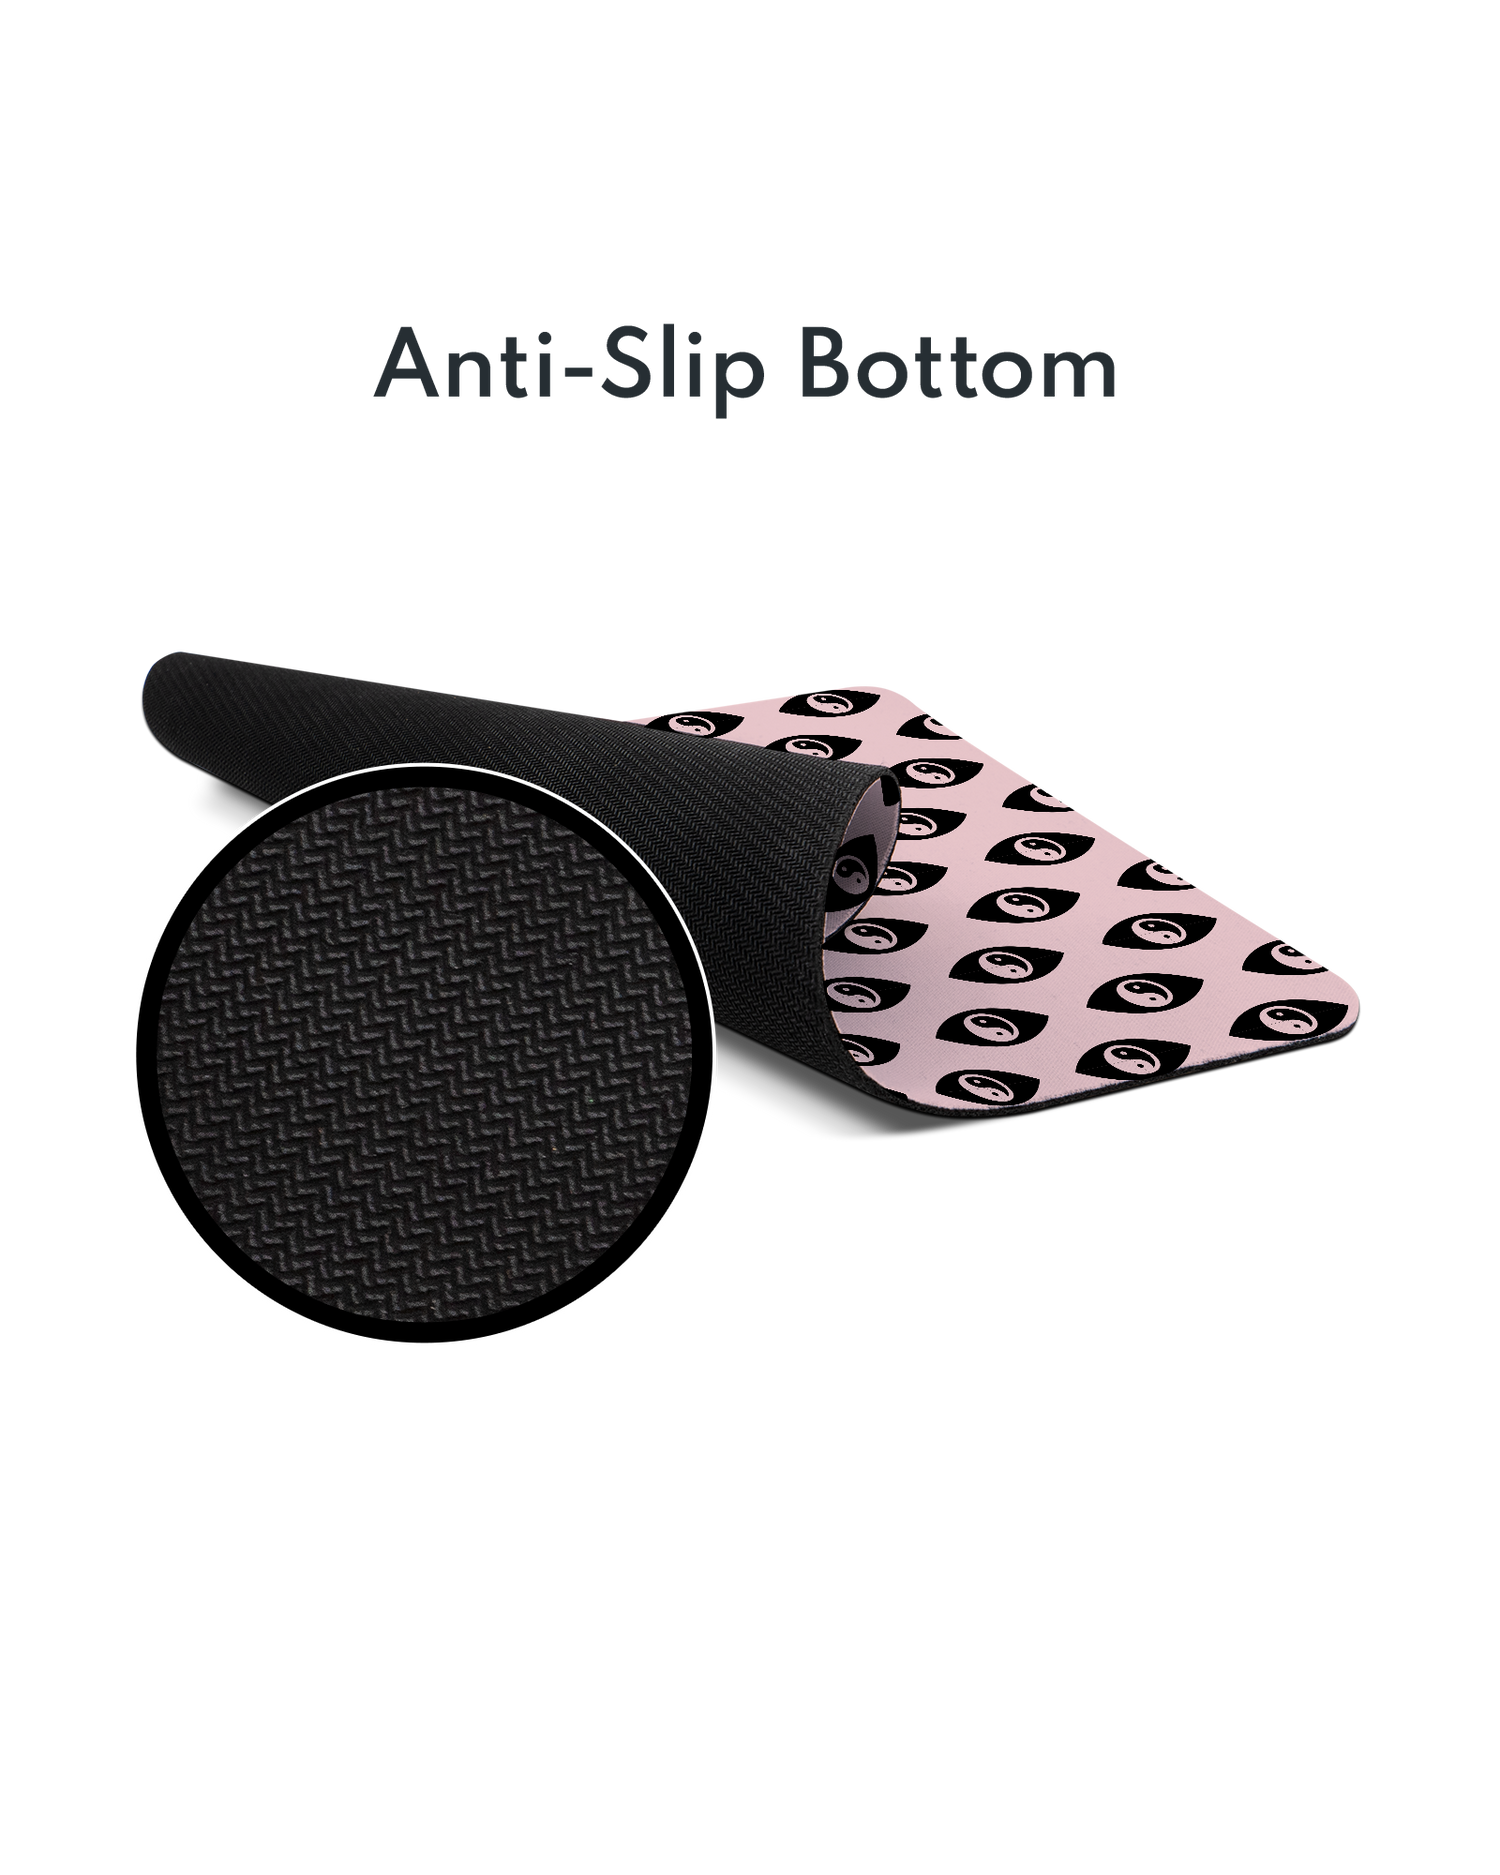 Yin Yang Repeat Mouse Pad with Non-slip Underside